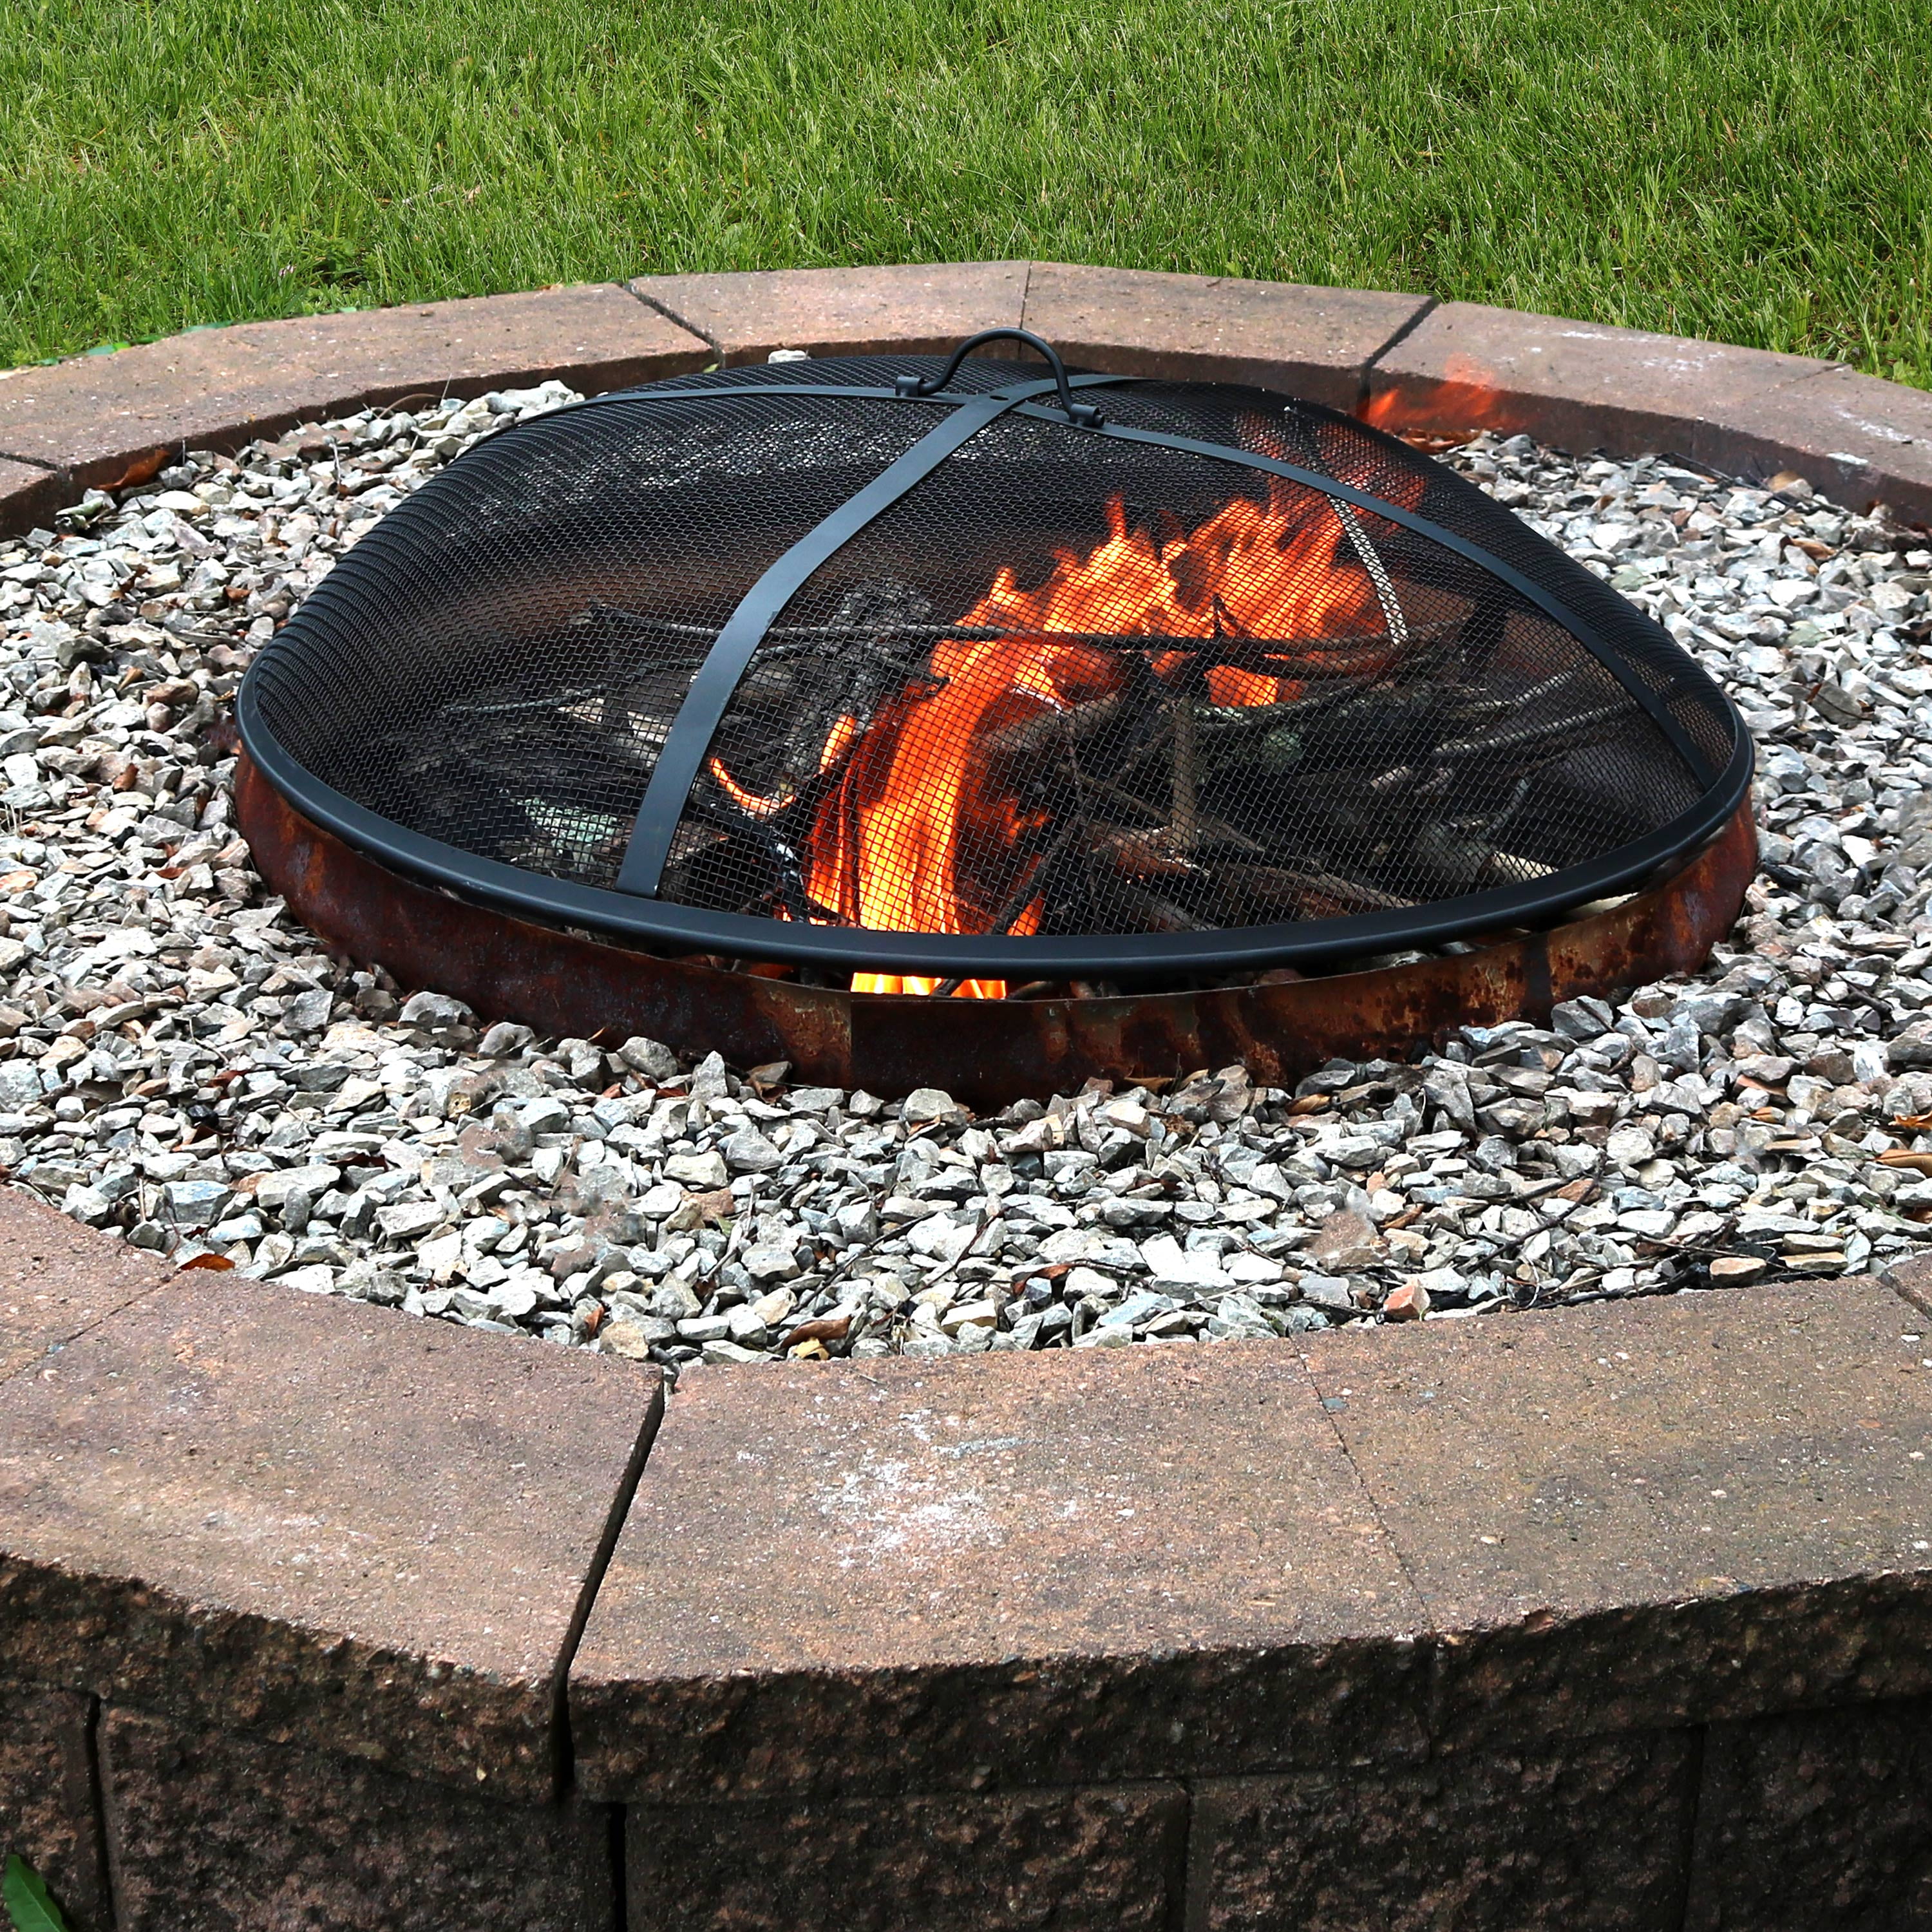 Sunnydaze Outdoor Fire Pit Spark Screen, Fire Pit Dome Cover